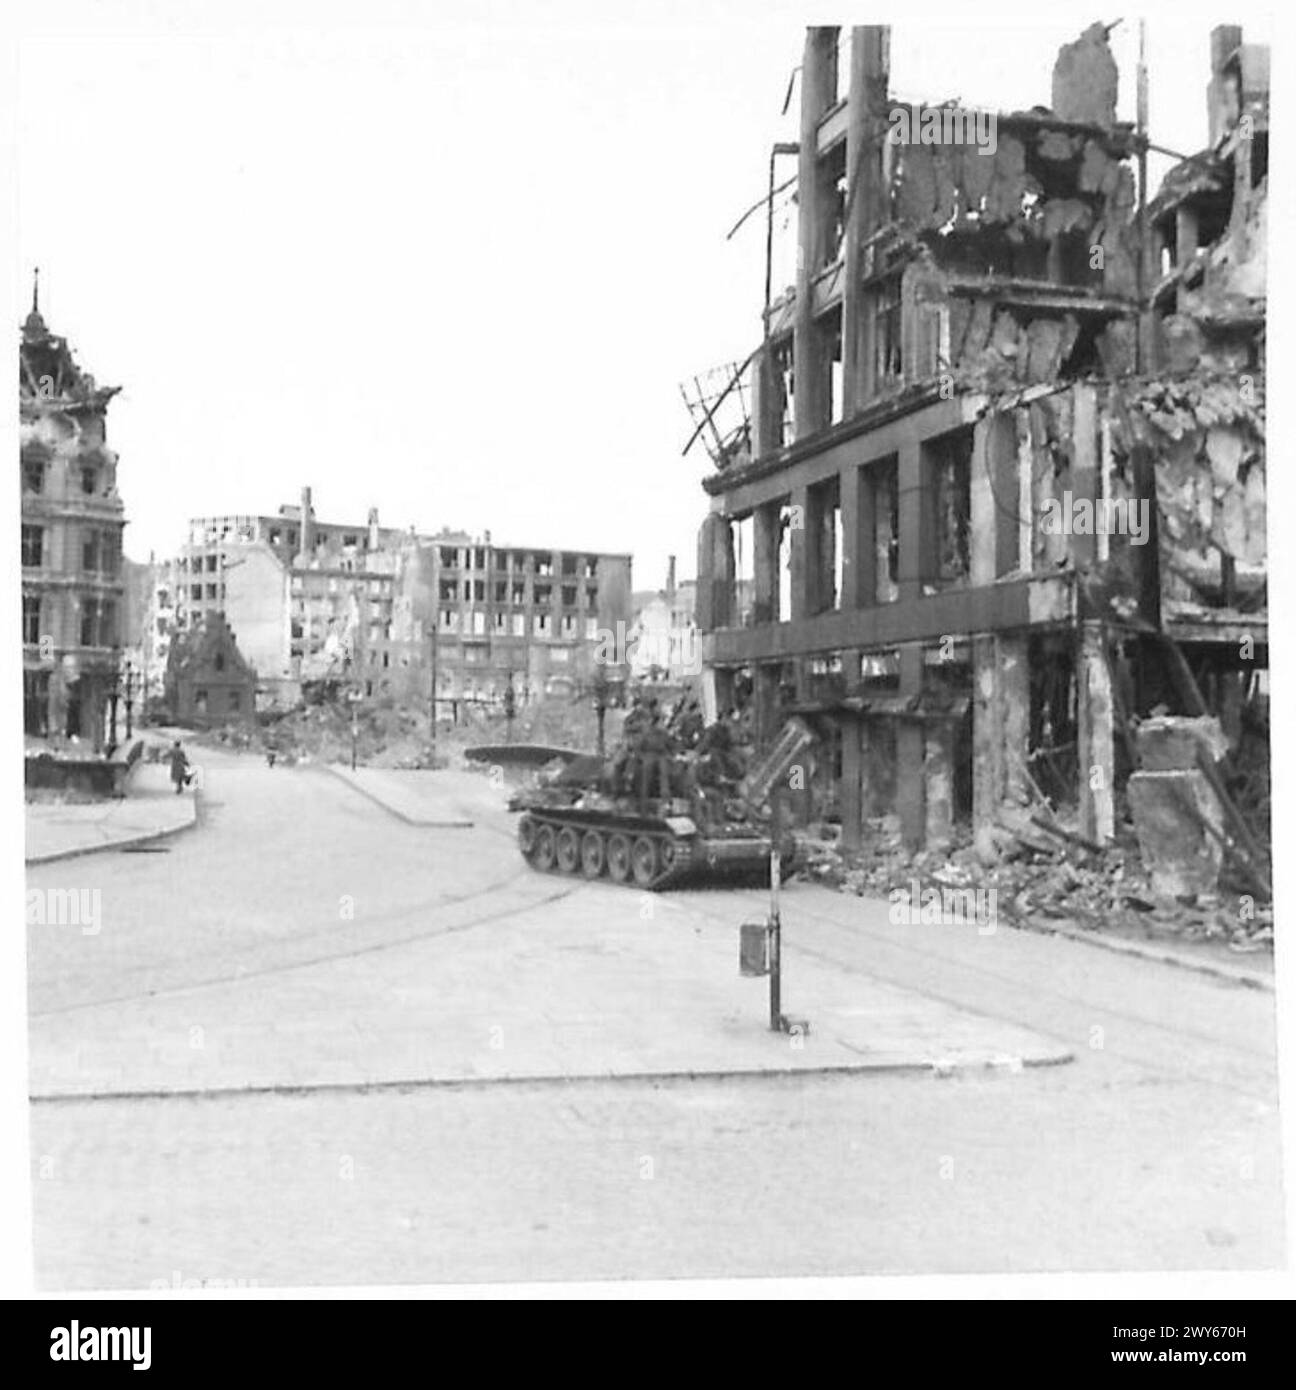 SECOND DAY IN HAMBURG AFTER SURRENDER OF TOWN - A Cromwell tank moves through a street wrecked by R.A.F. bombing in Hamburg. , British Army, 21st Army Group Stock Photo